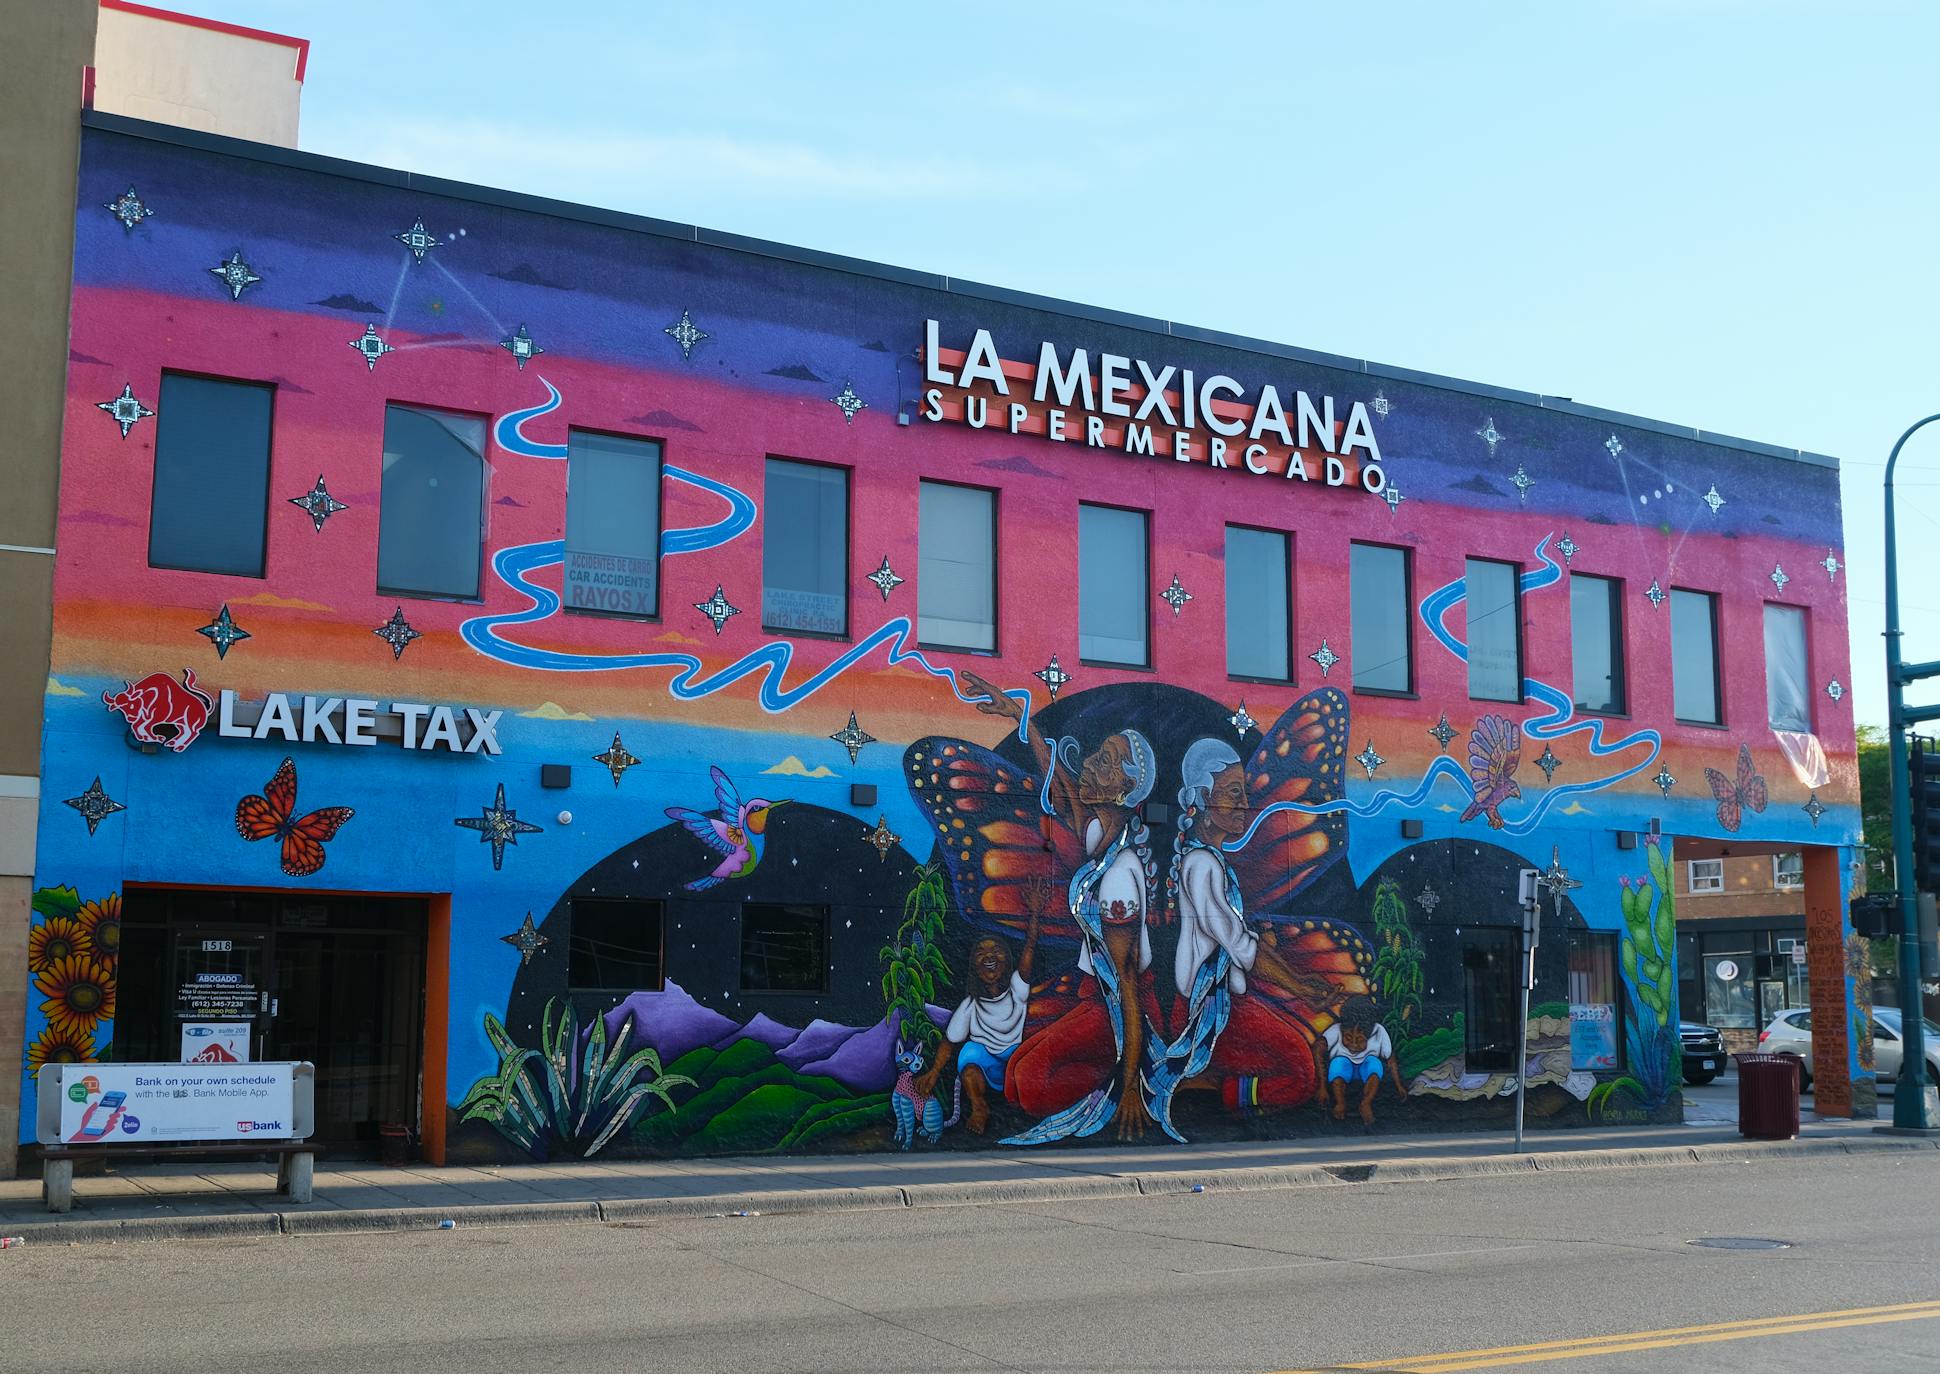 La Mexicana Grocery has been in business more than 20 years and features two murals on the sides of the building.